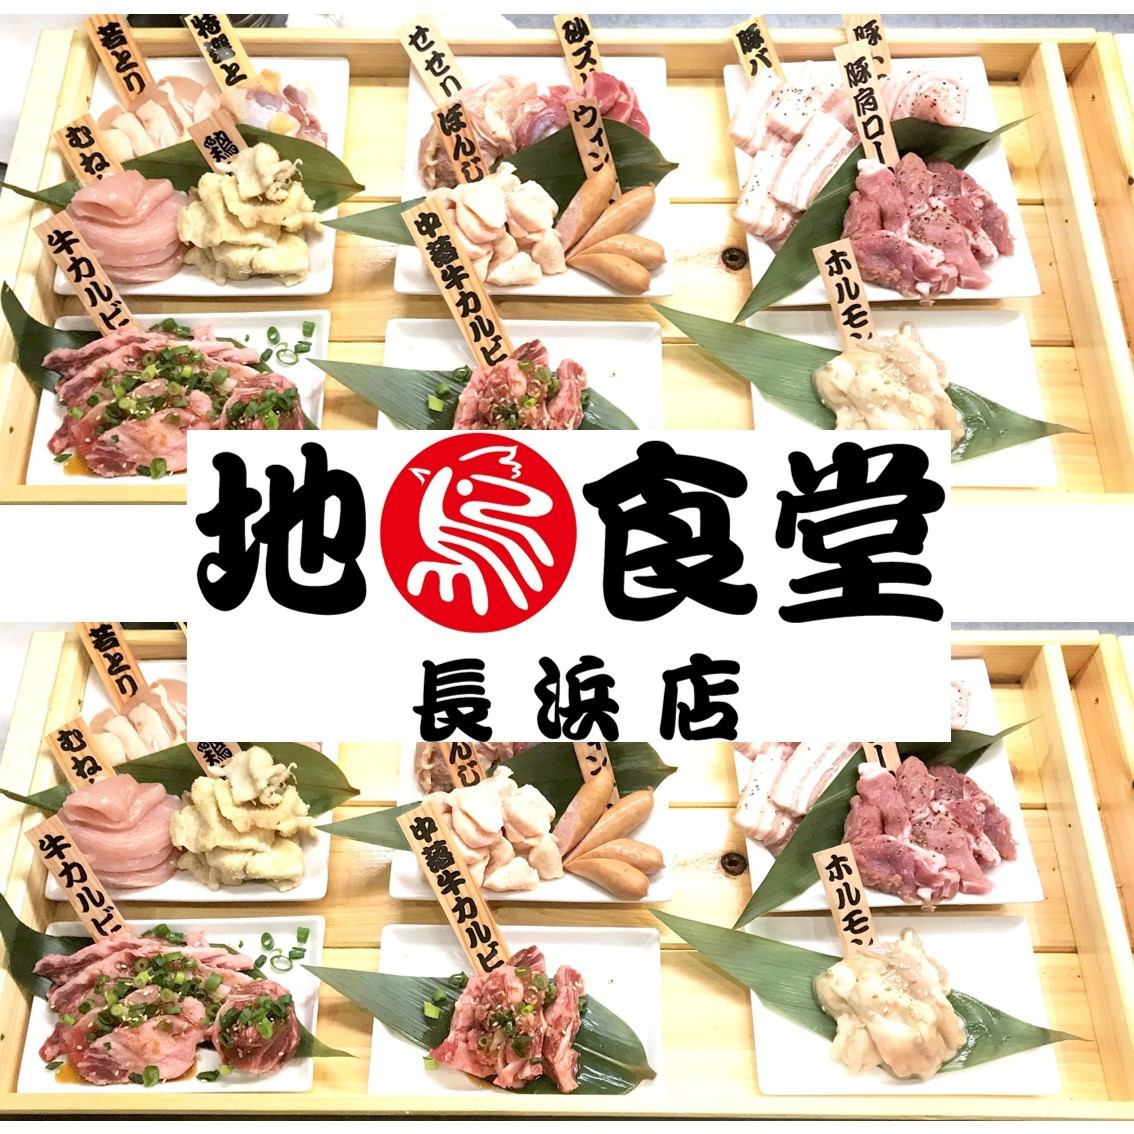 Boasting domestic chicken freshness! All-you-can-eat local chicken ♪